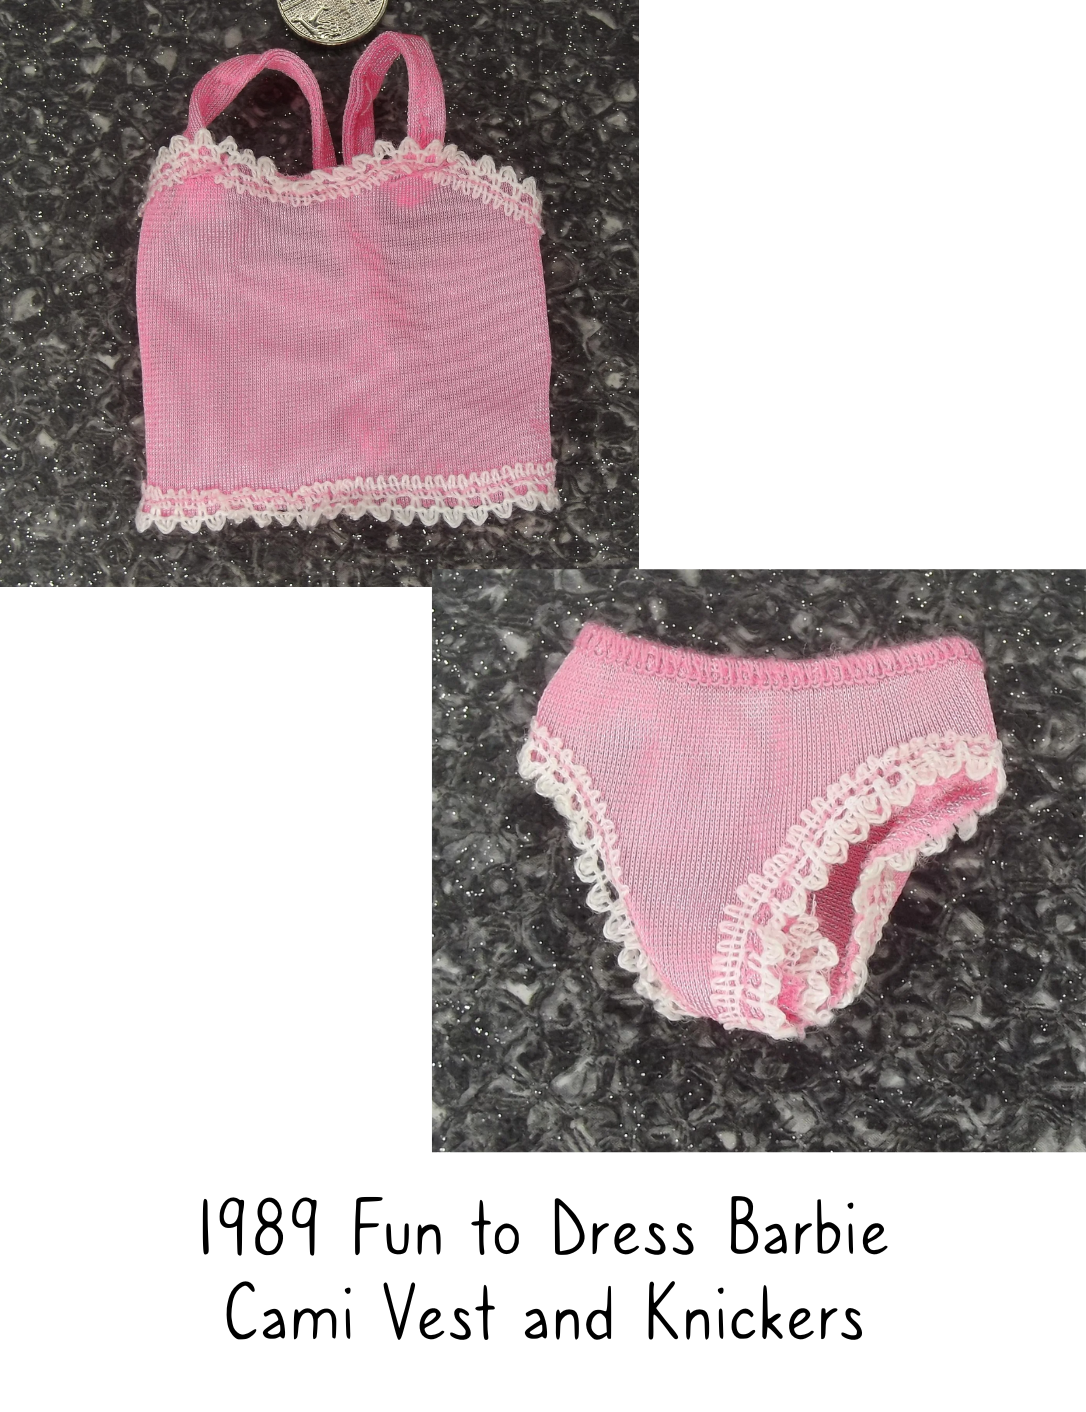 1989 Fun to Dress Barbie Pink Cami Vest and Knickers